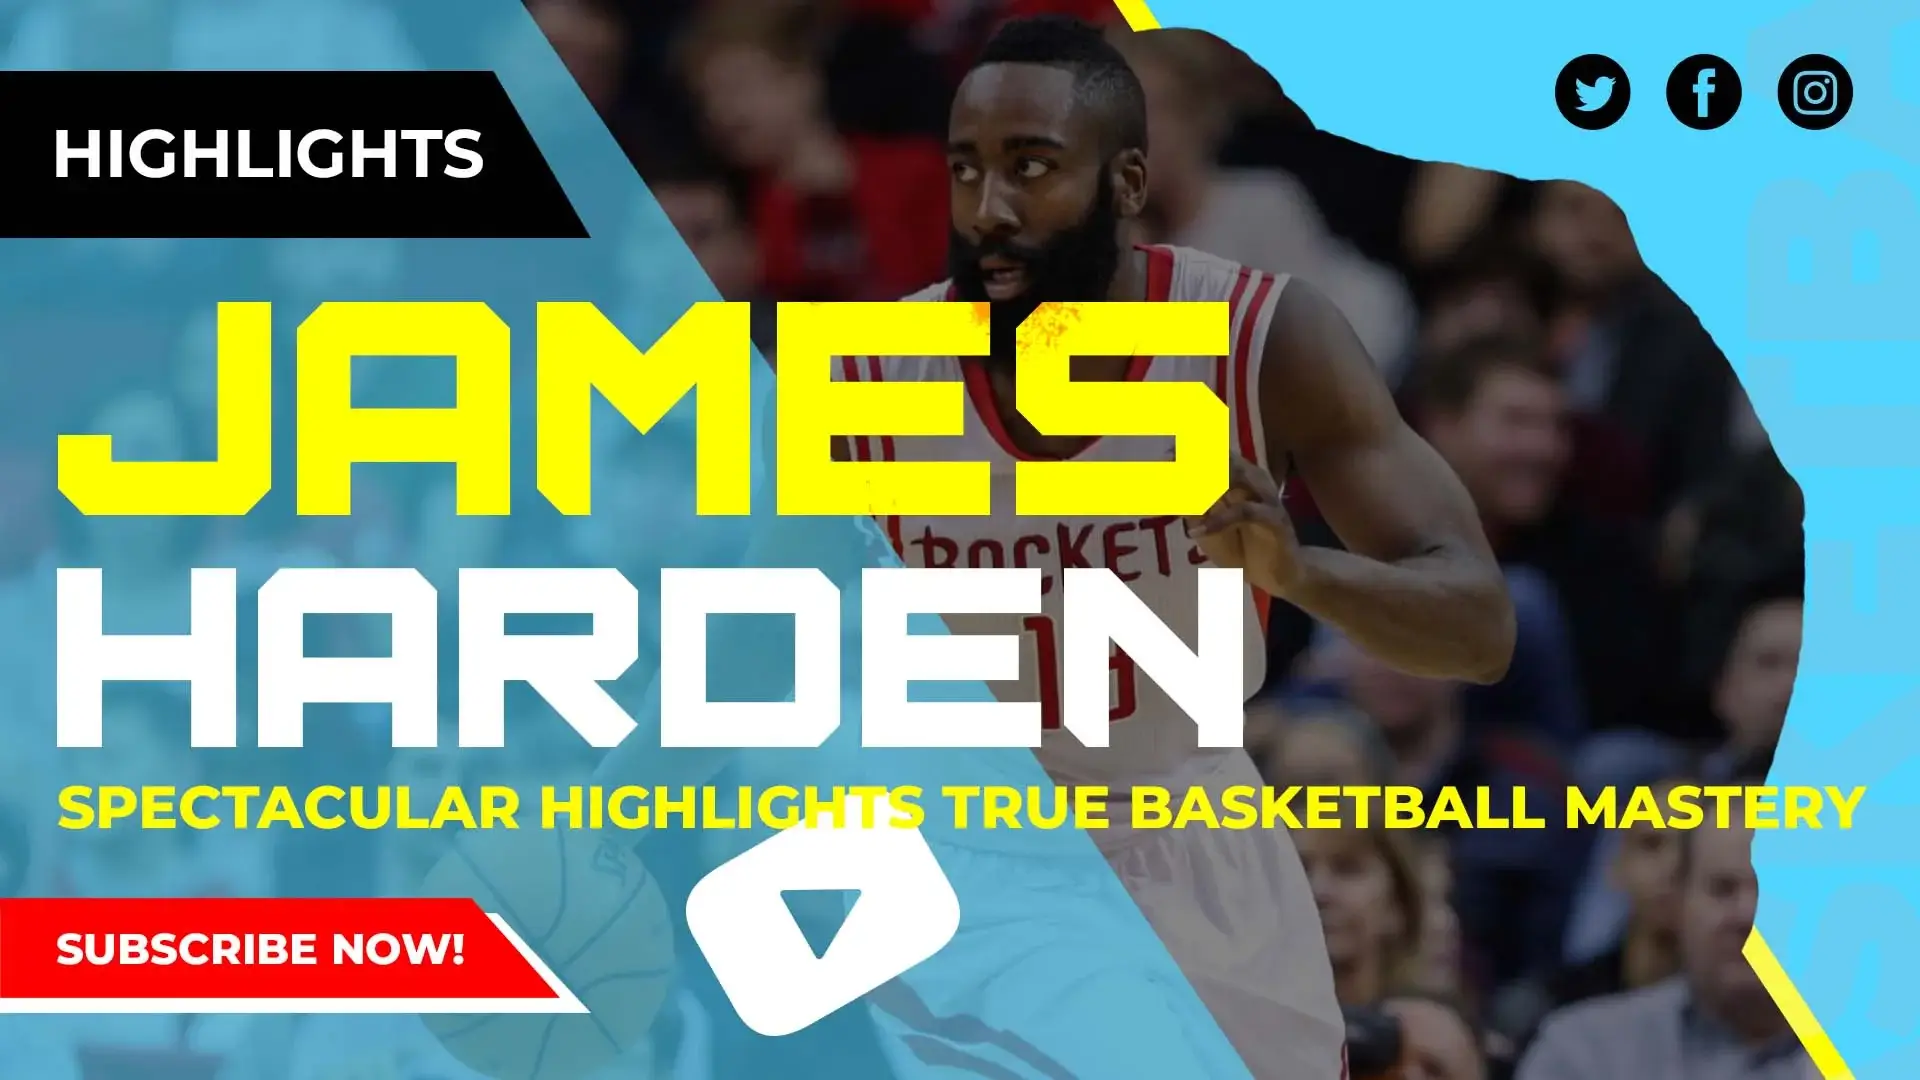 Dribble, Drive, Dominate: James Harden's Spectacular Highlights Reveal True Basketball Mastery